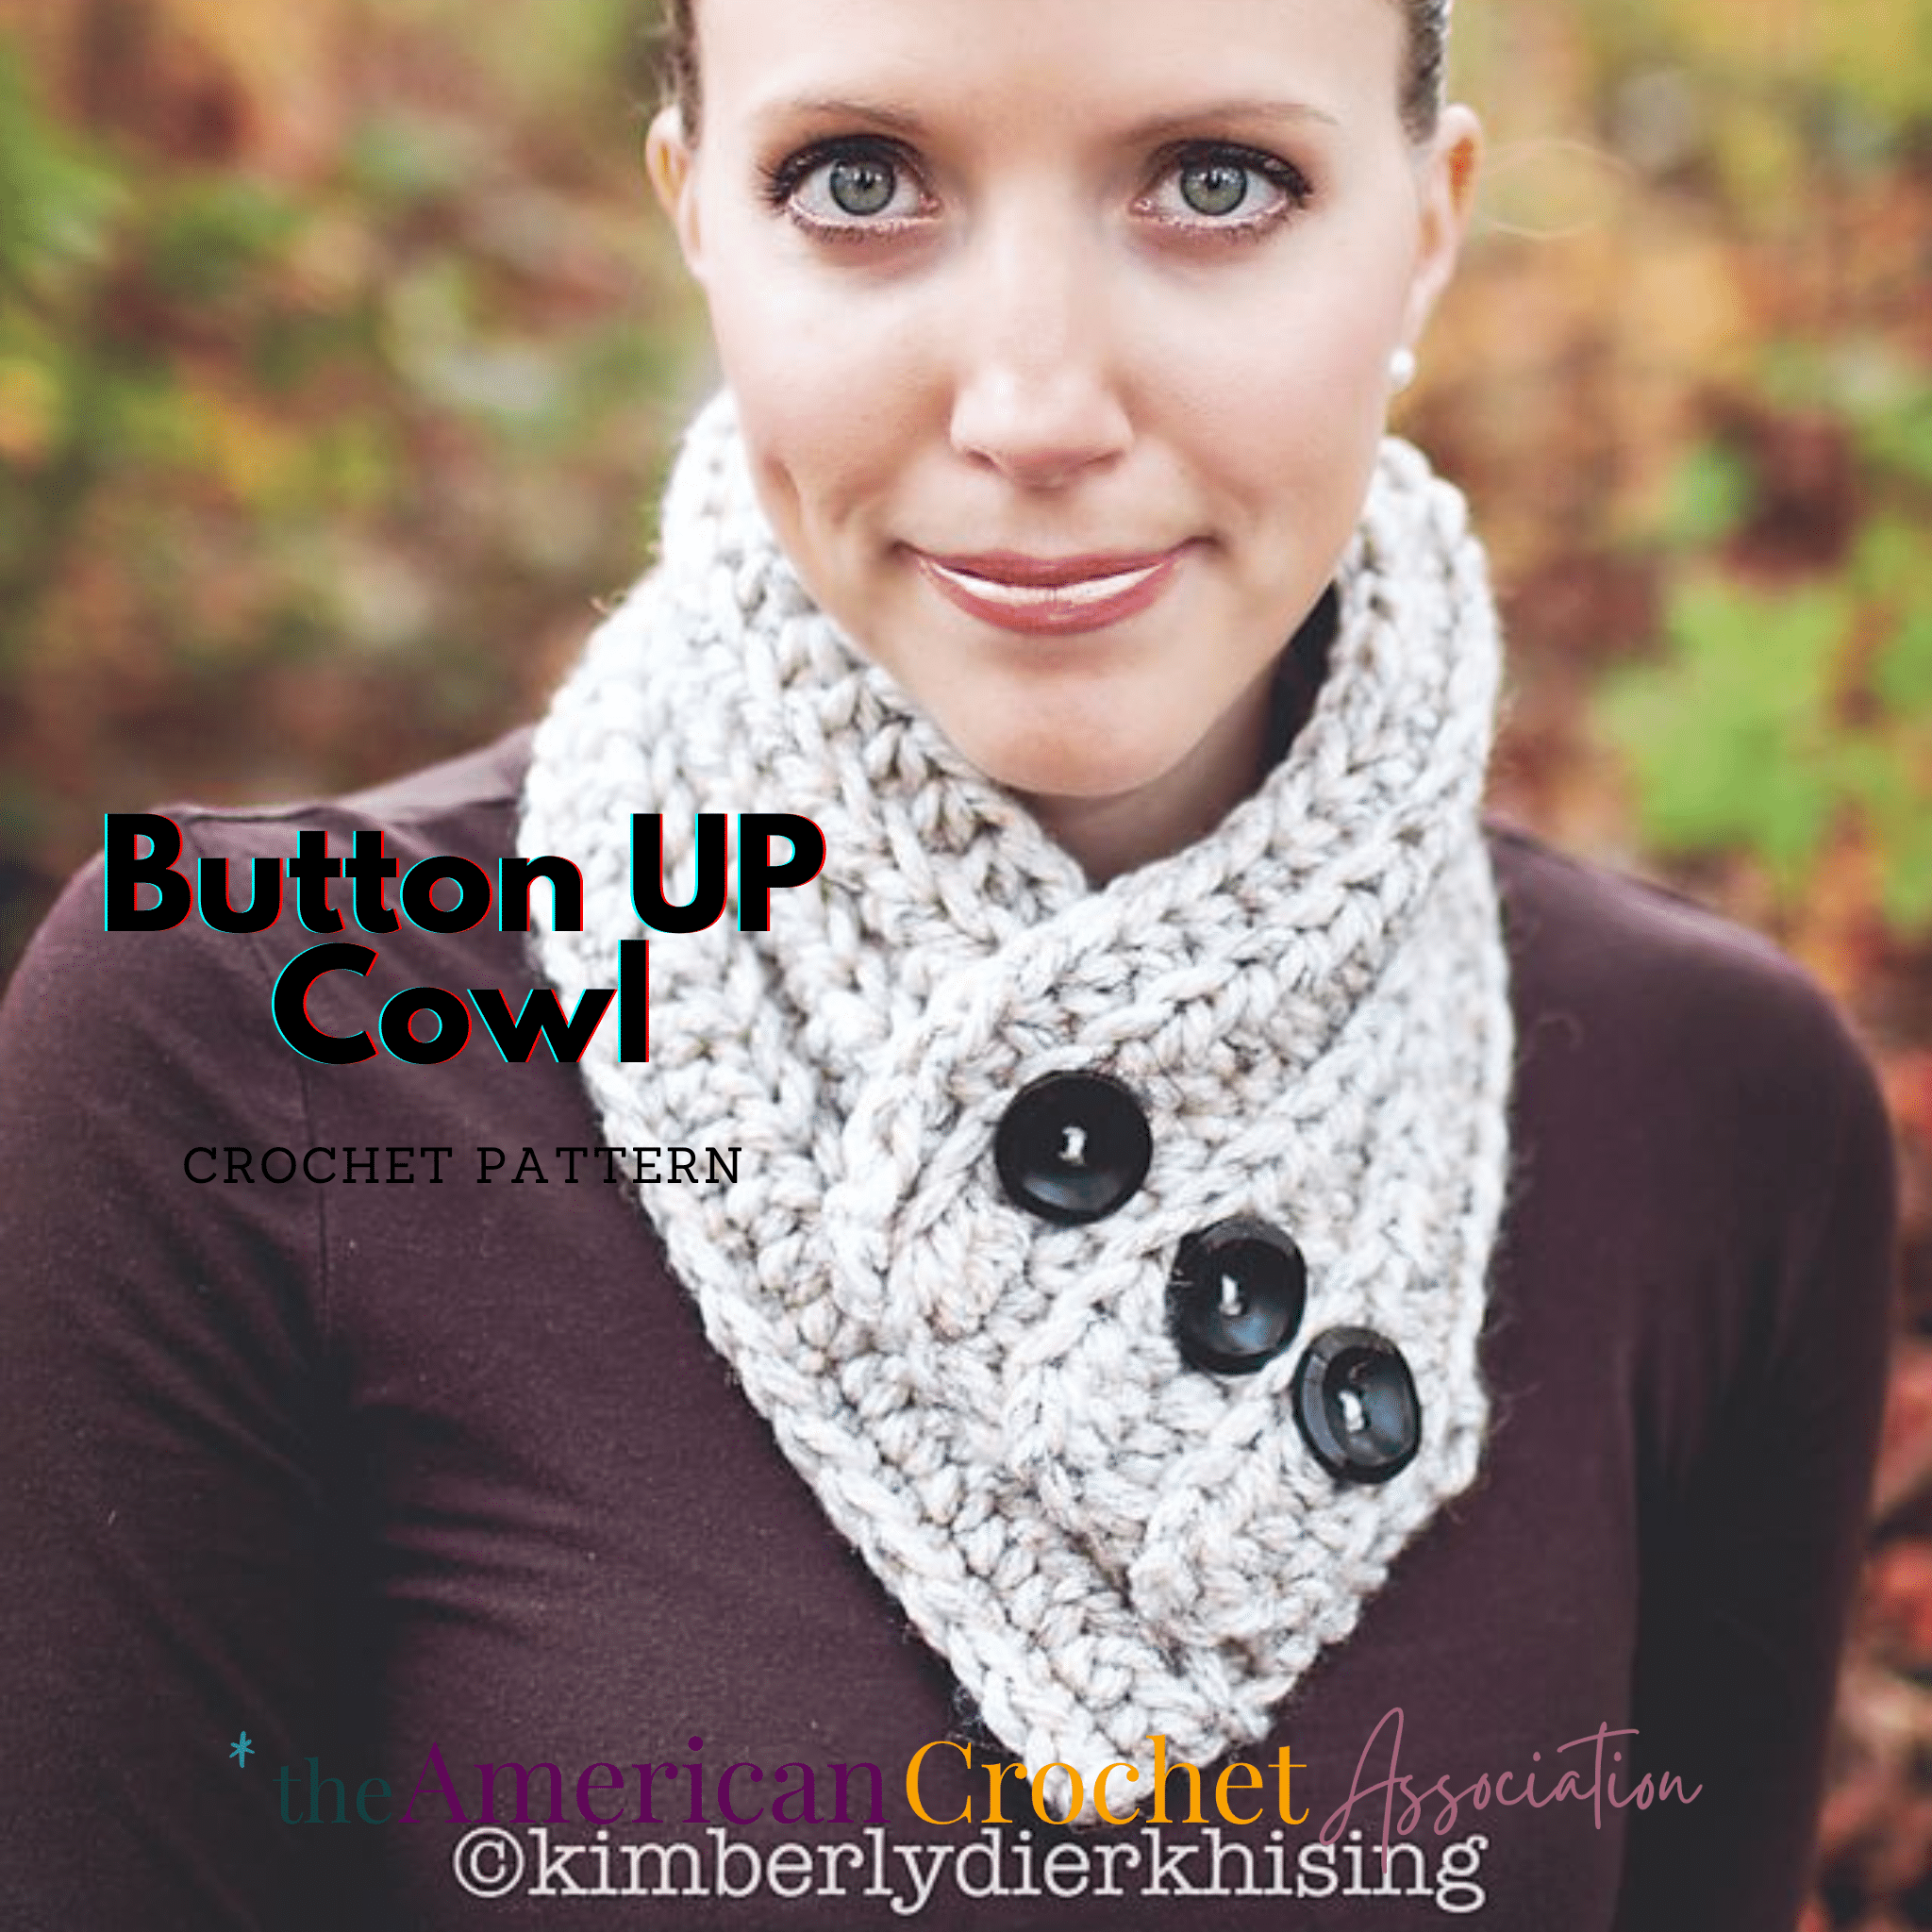 Crochet Cowl with Buttons: Beginner Pattern with 4 Sizes